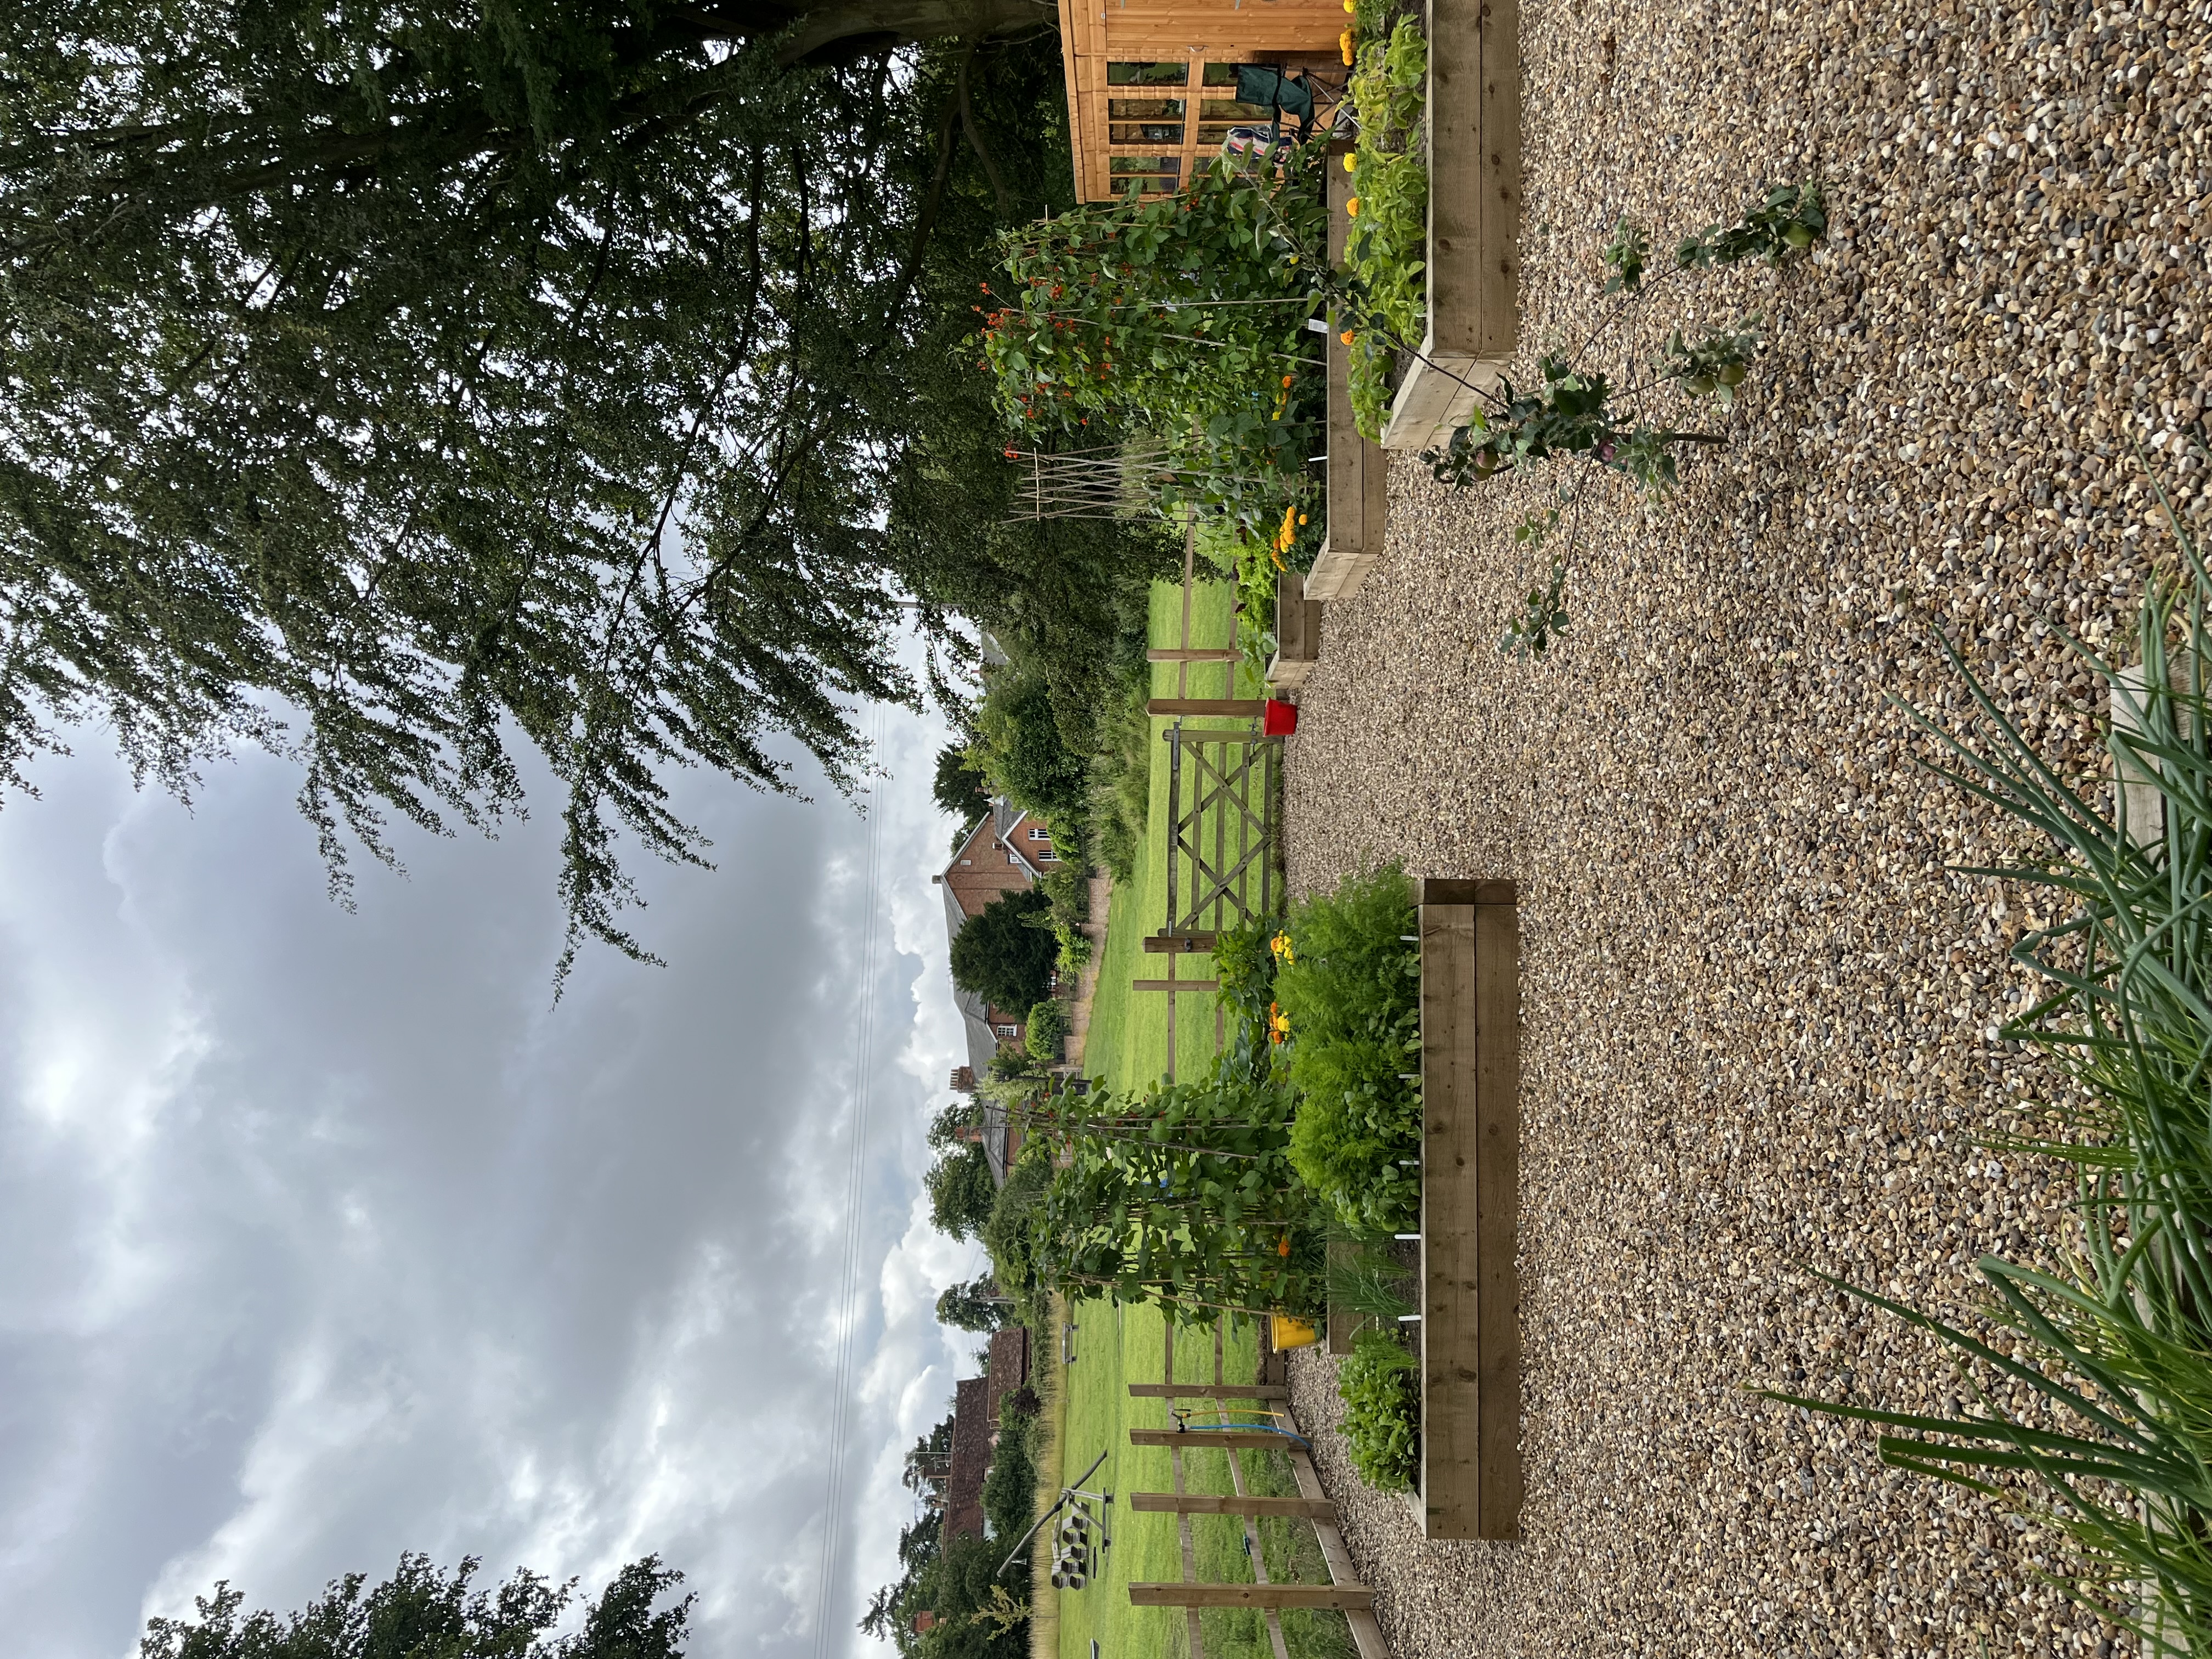 The image shows a raised bed in a small gardens with some green space and trees in the background.